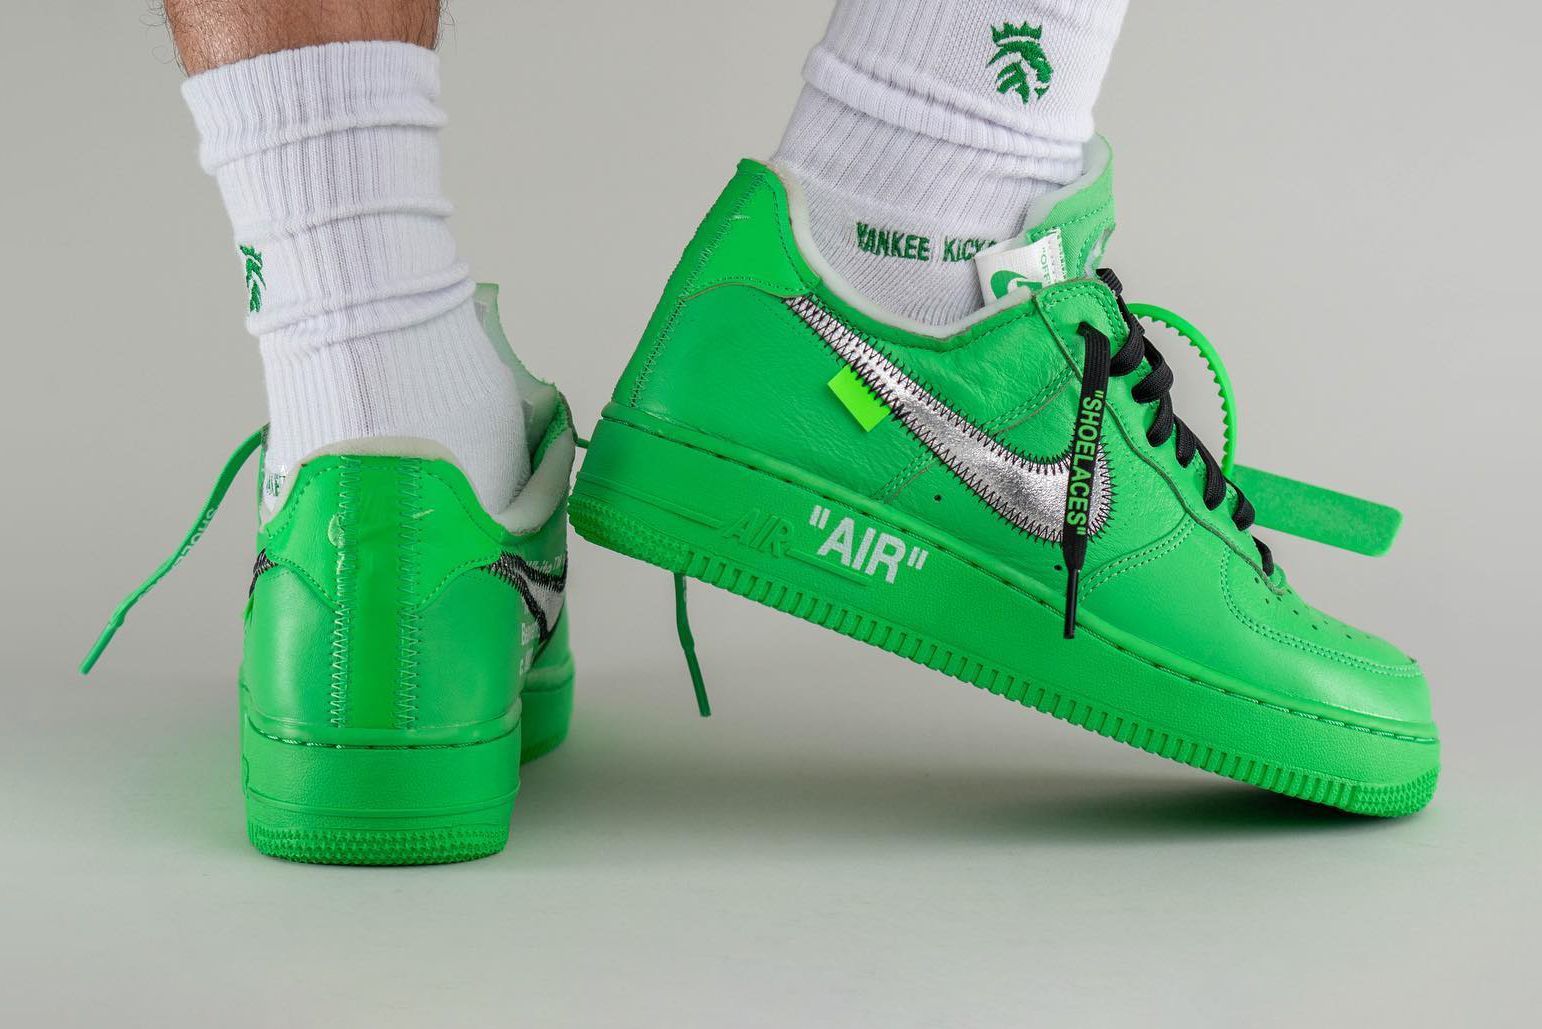 Off-white Air Force 1 Light Green Spark Drops in July